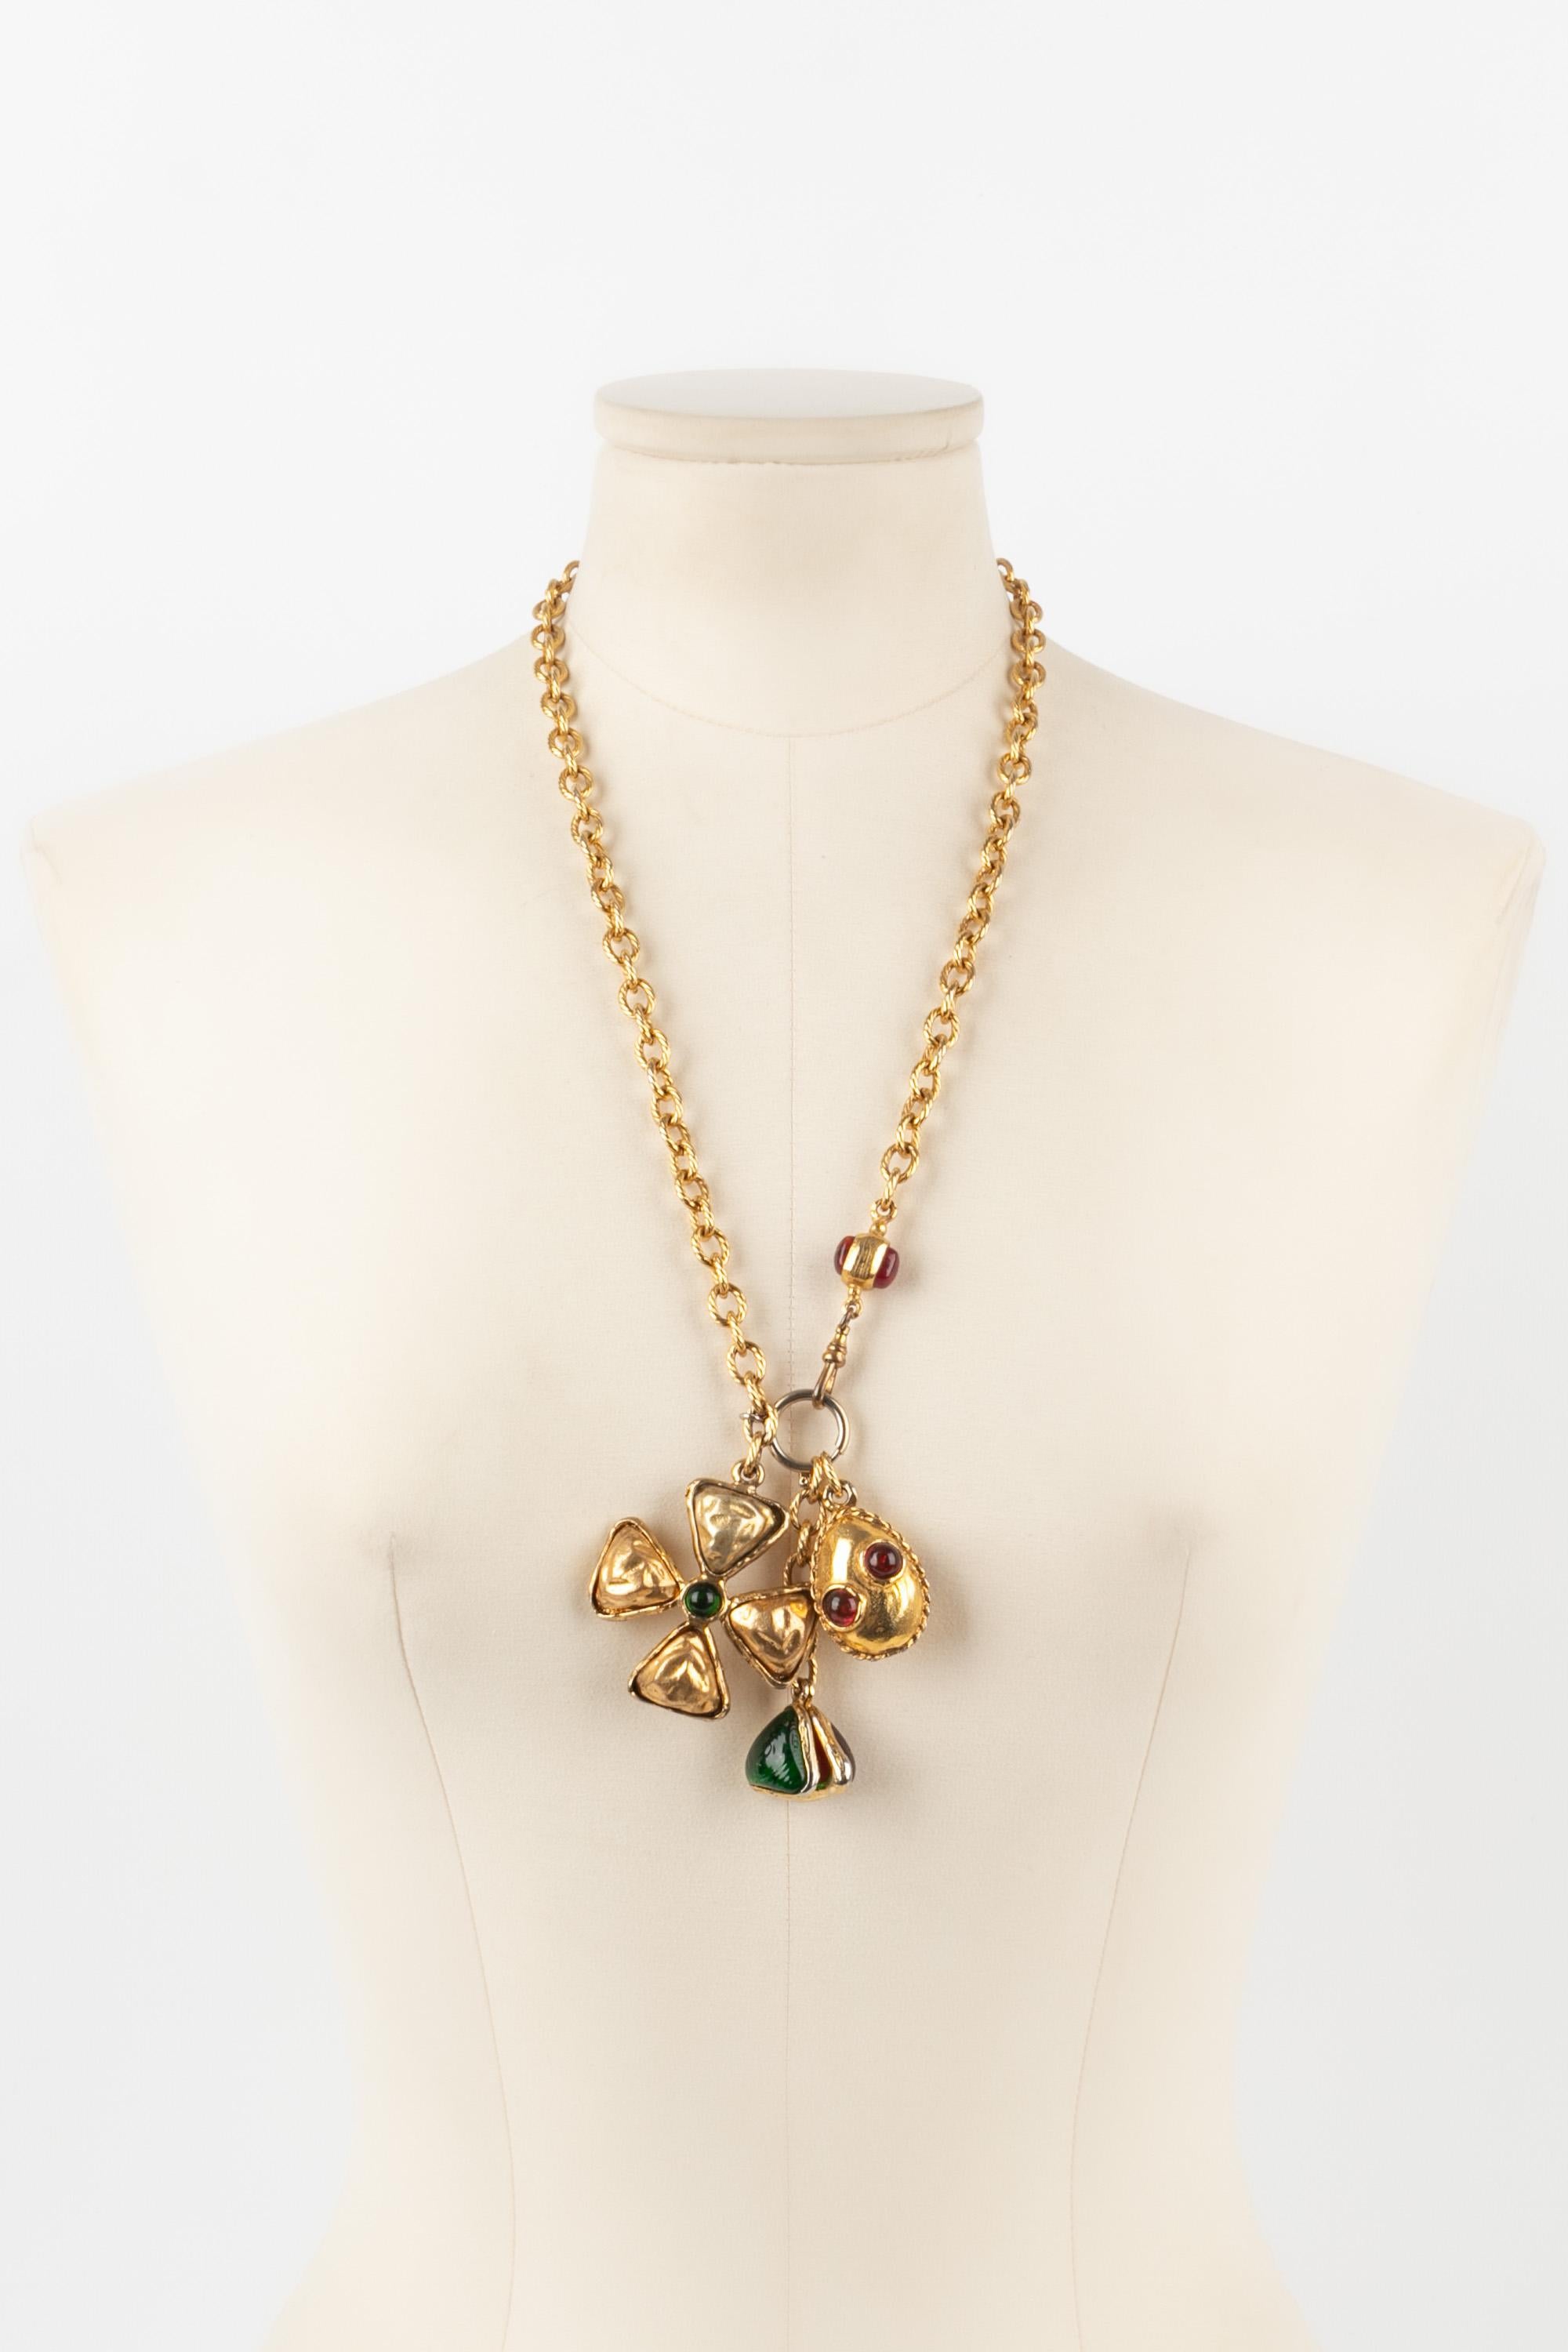 CHANEL - (Made in France) Golden metal necklace with glass paste. Jewelry from the 1990s.

Condition:
Good condition

Dimensions:
Length: 64 cm

CB267